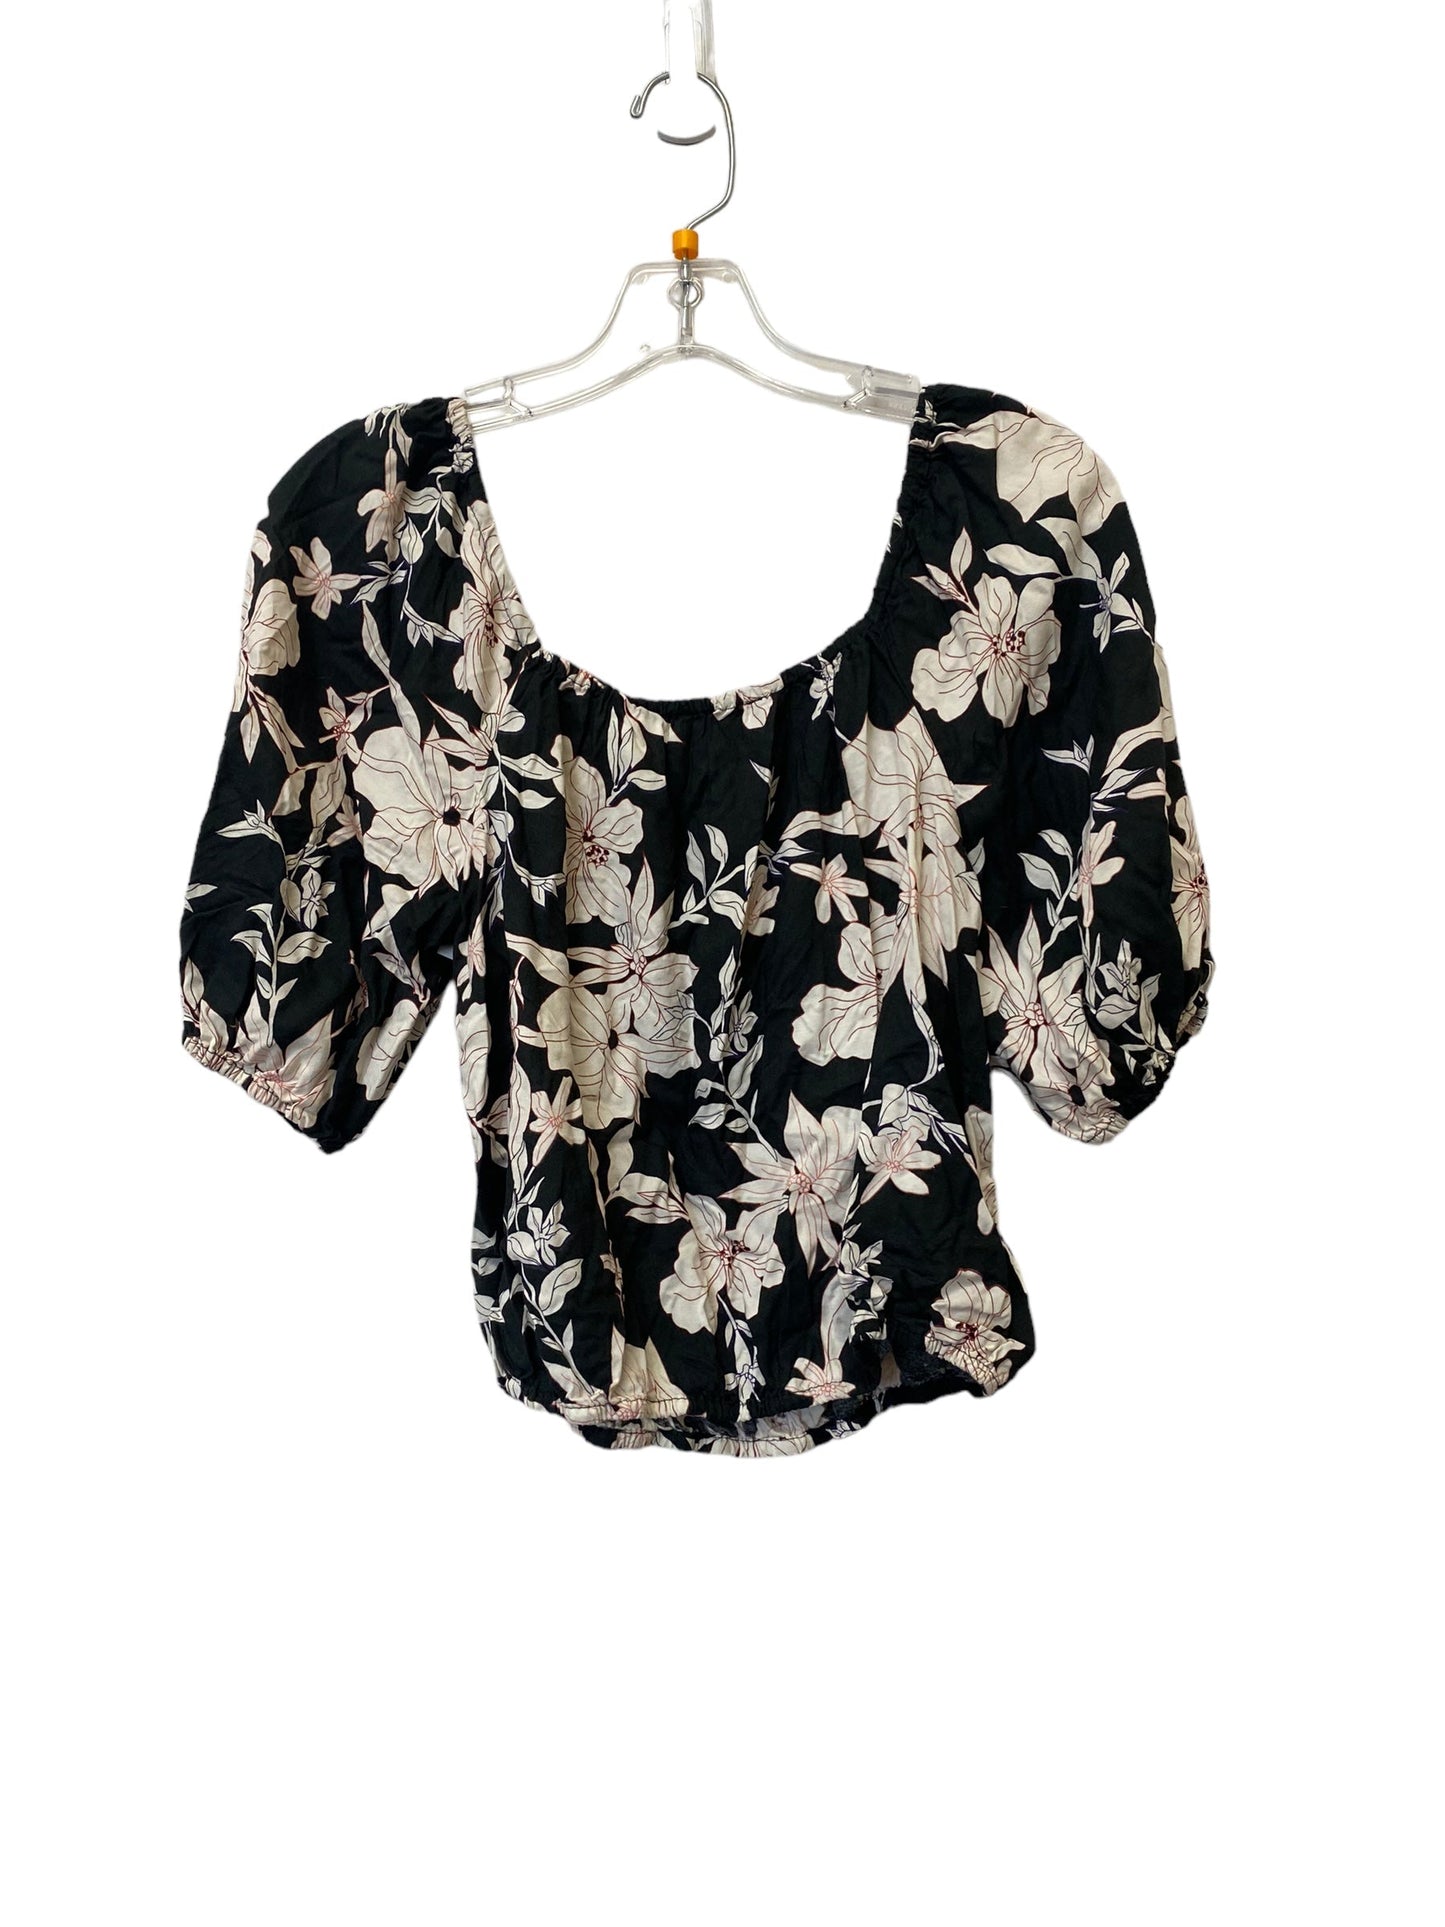 Top Short Sleeve By Sanctuary  Size: Xs